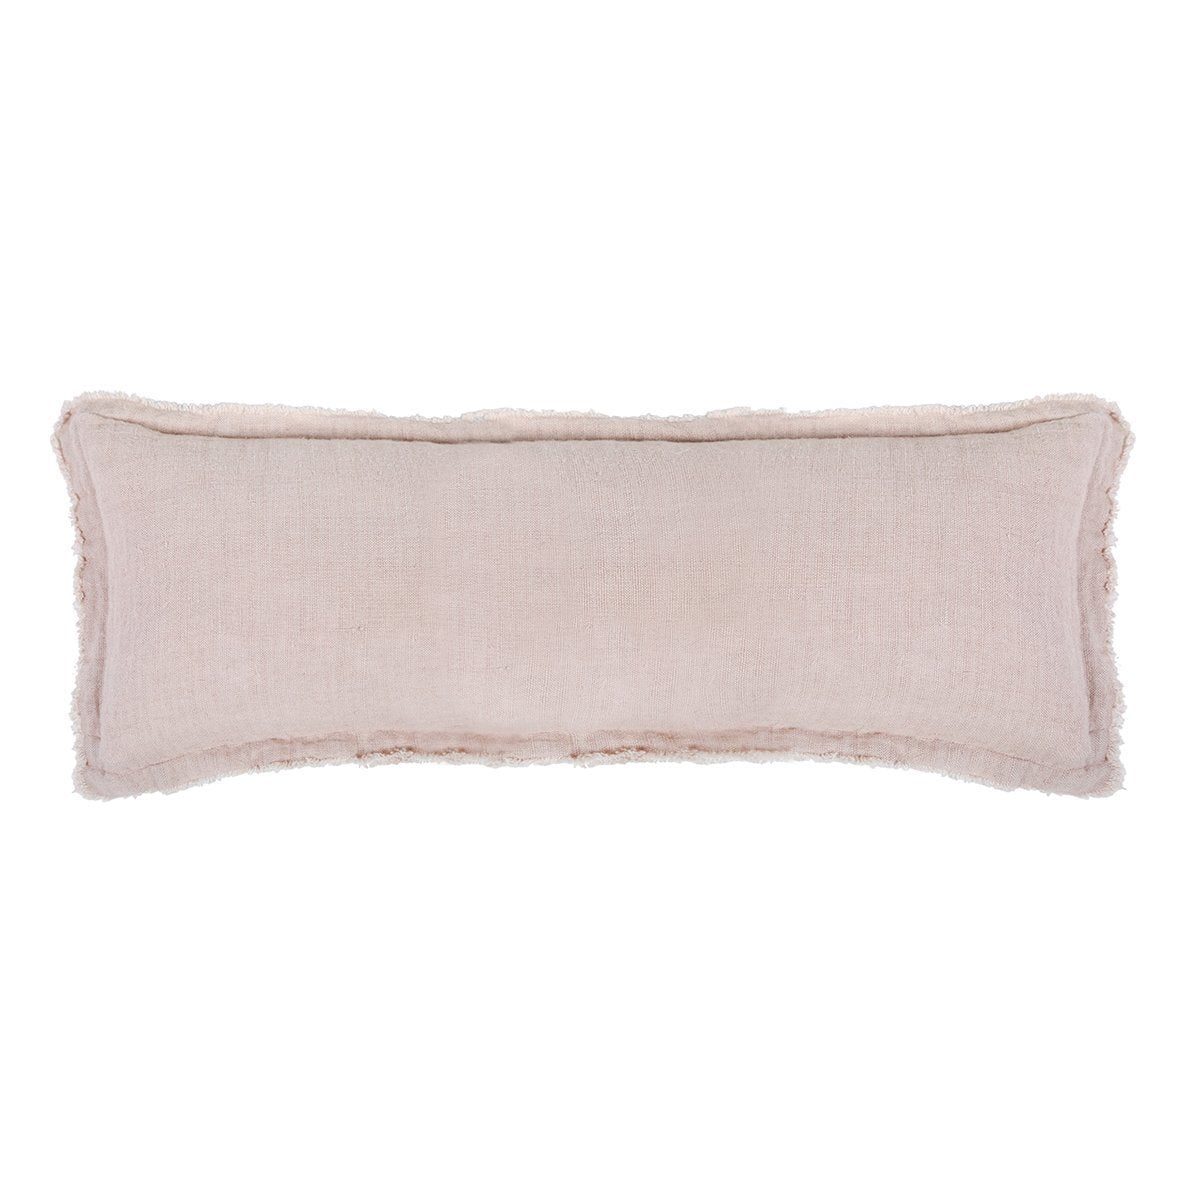 The Laurel Blush 14x40 Pillow with Insert is a beautiful, stonewashed linen with frayed edges.   Details & Care: 100% Linen  Machine Wash cold: tumble dry low: warm iron as needed. Insert Included 